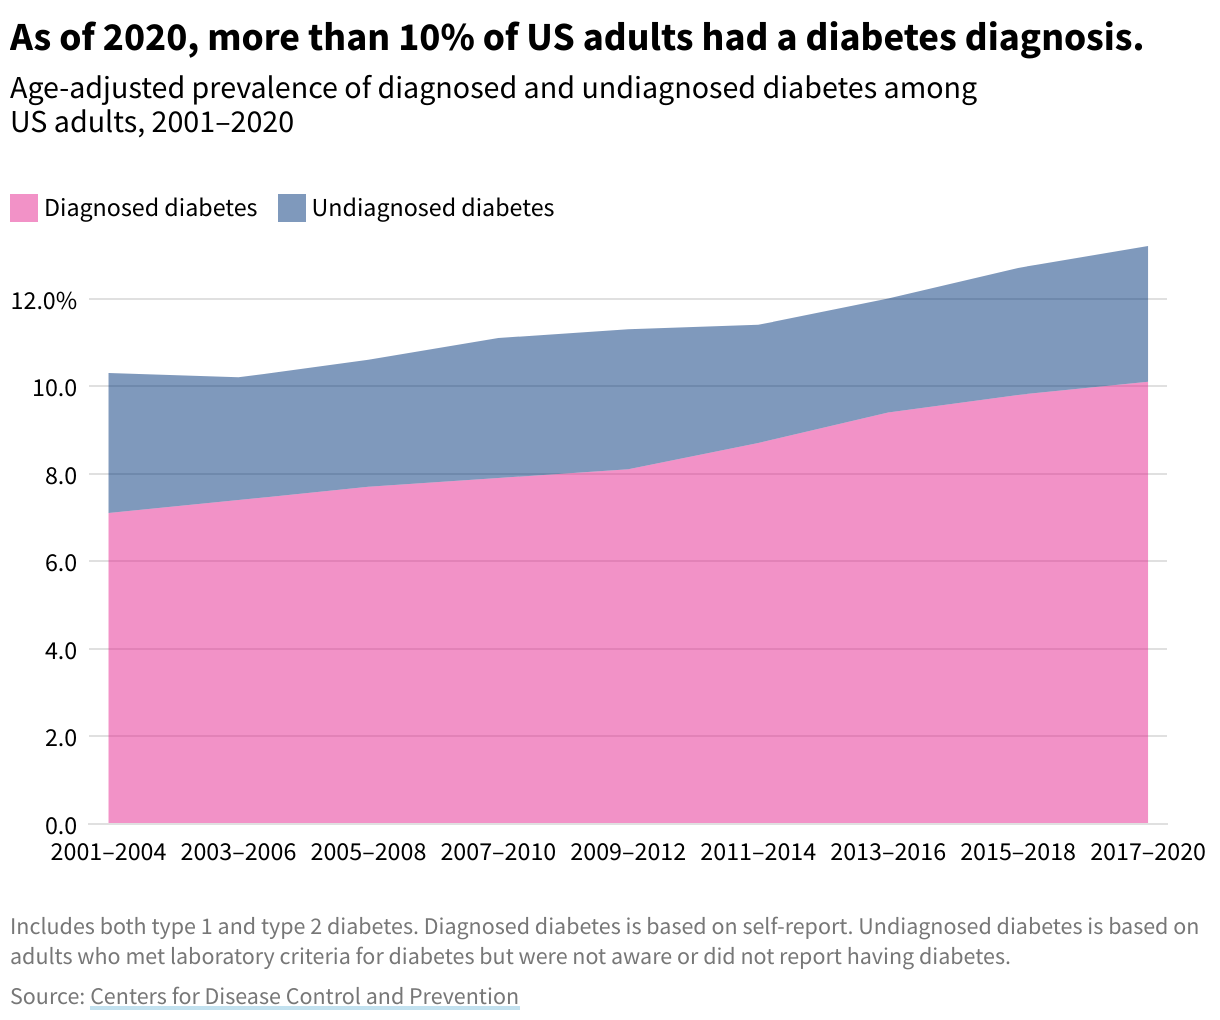 Area chart showing age-adjusted prevalence of diagnosed and undiagnosed diabetes among US adults. Diabetes rates increased over the first two decades of the 21st century.